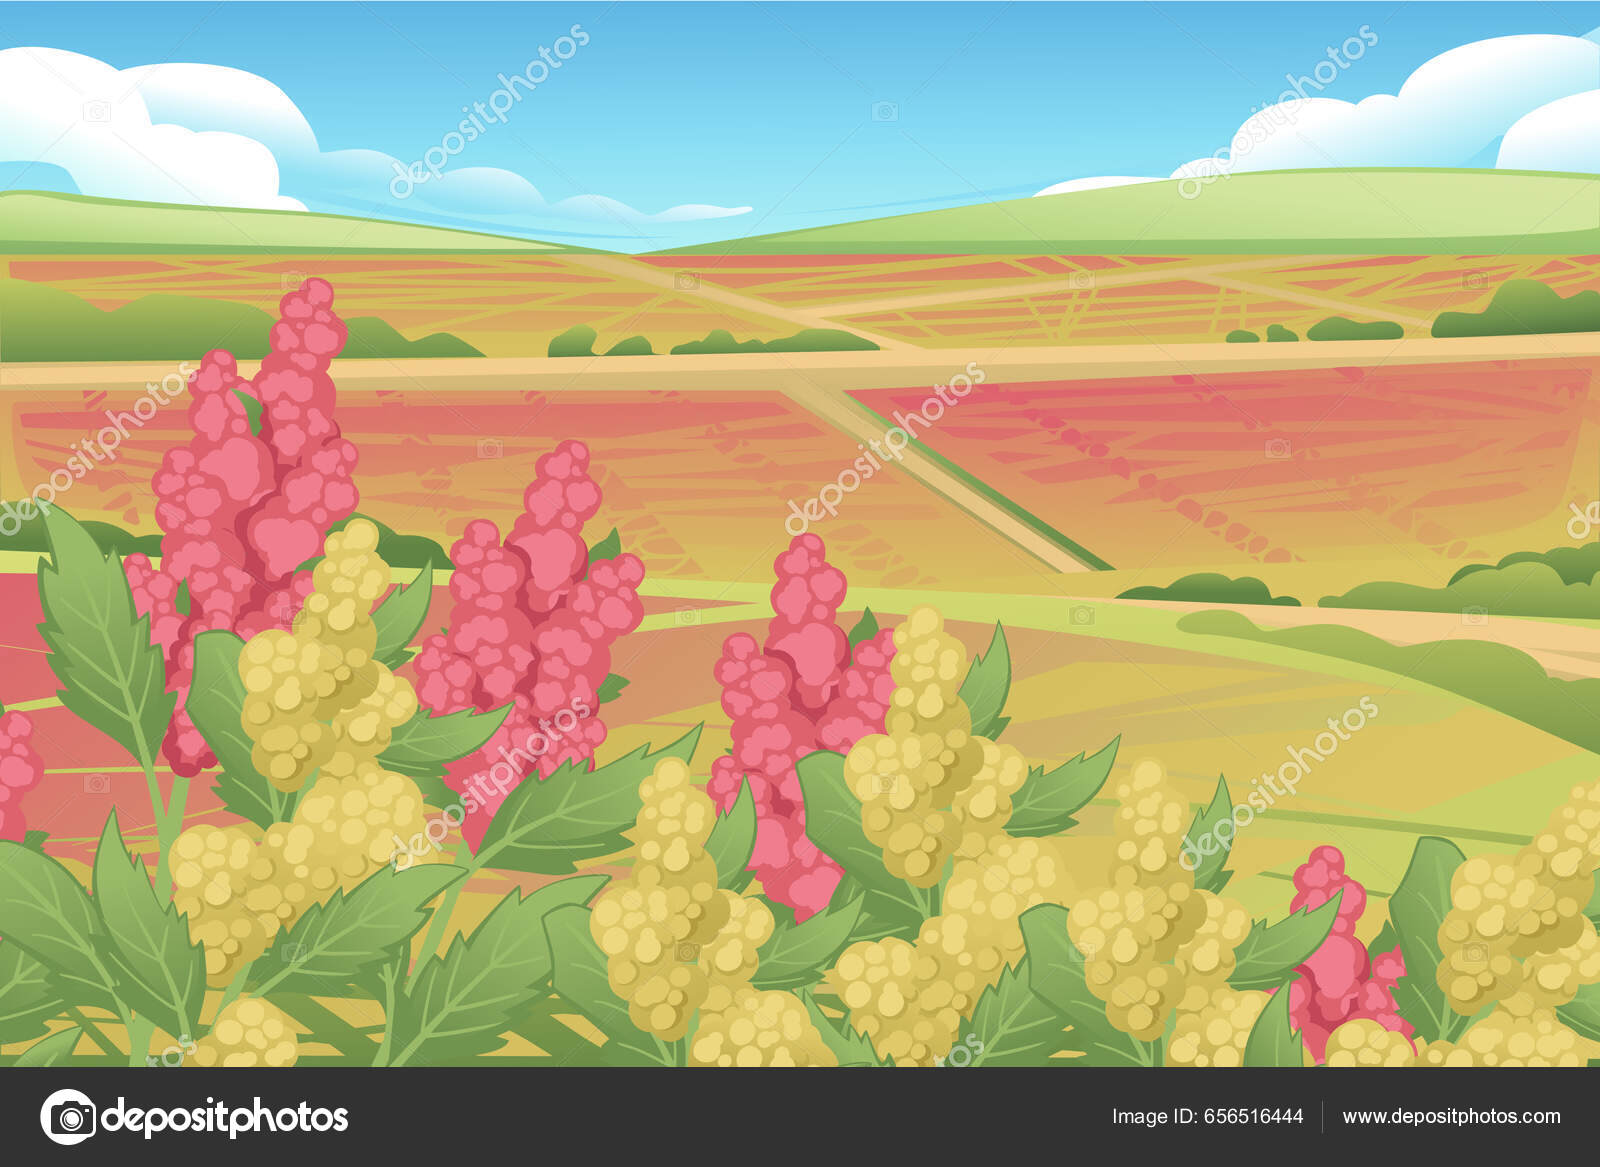 1,700+ Cotton Field Stock Illustrations, Royalty-Free Vector